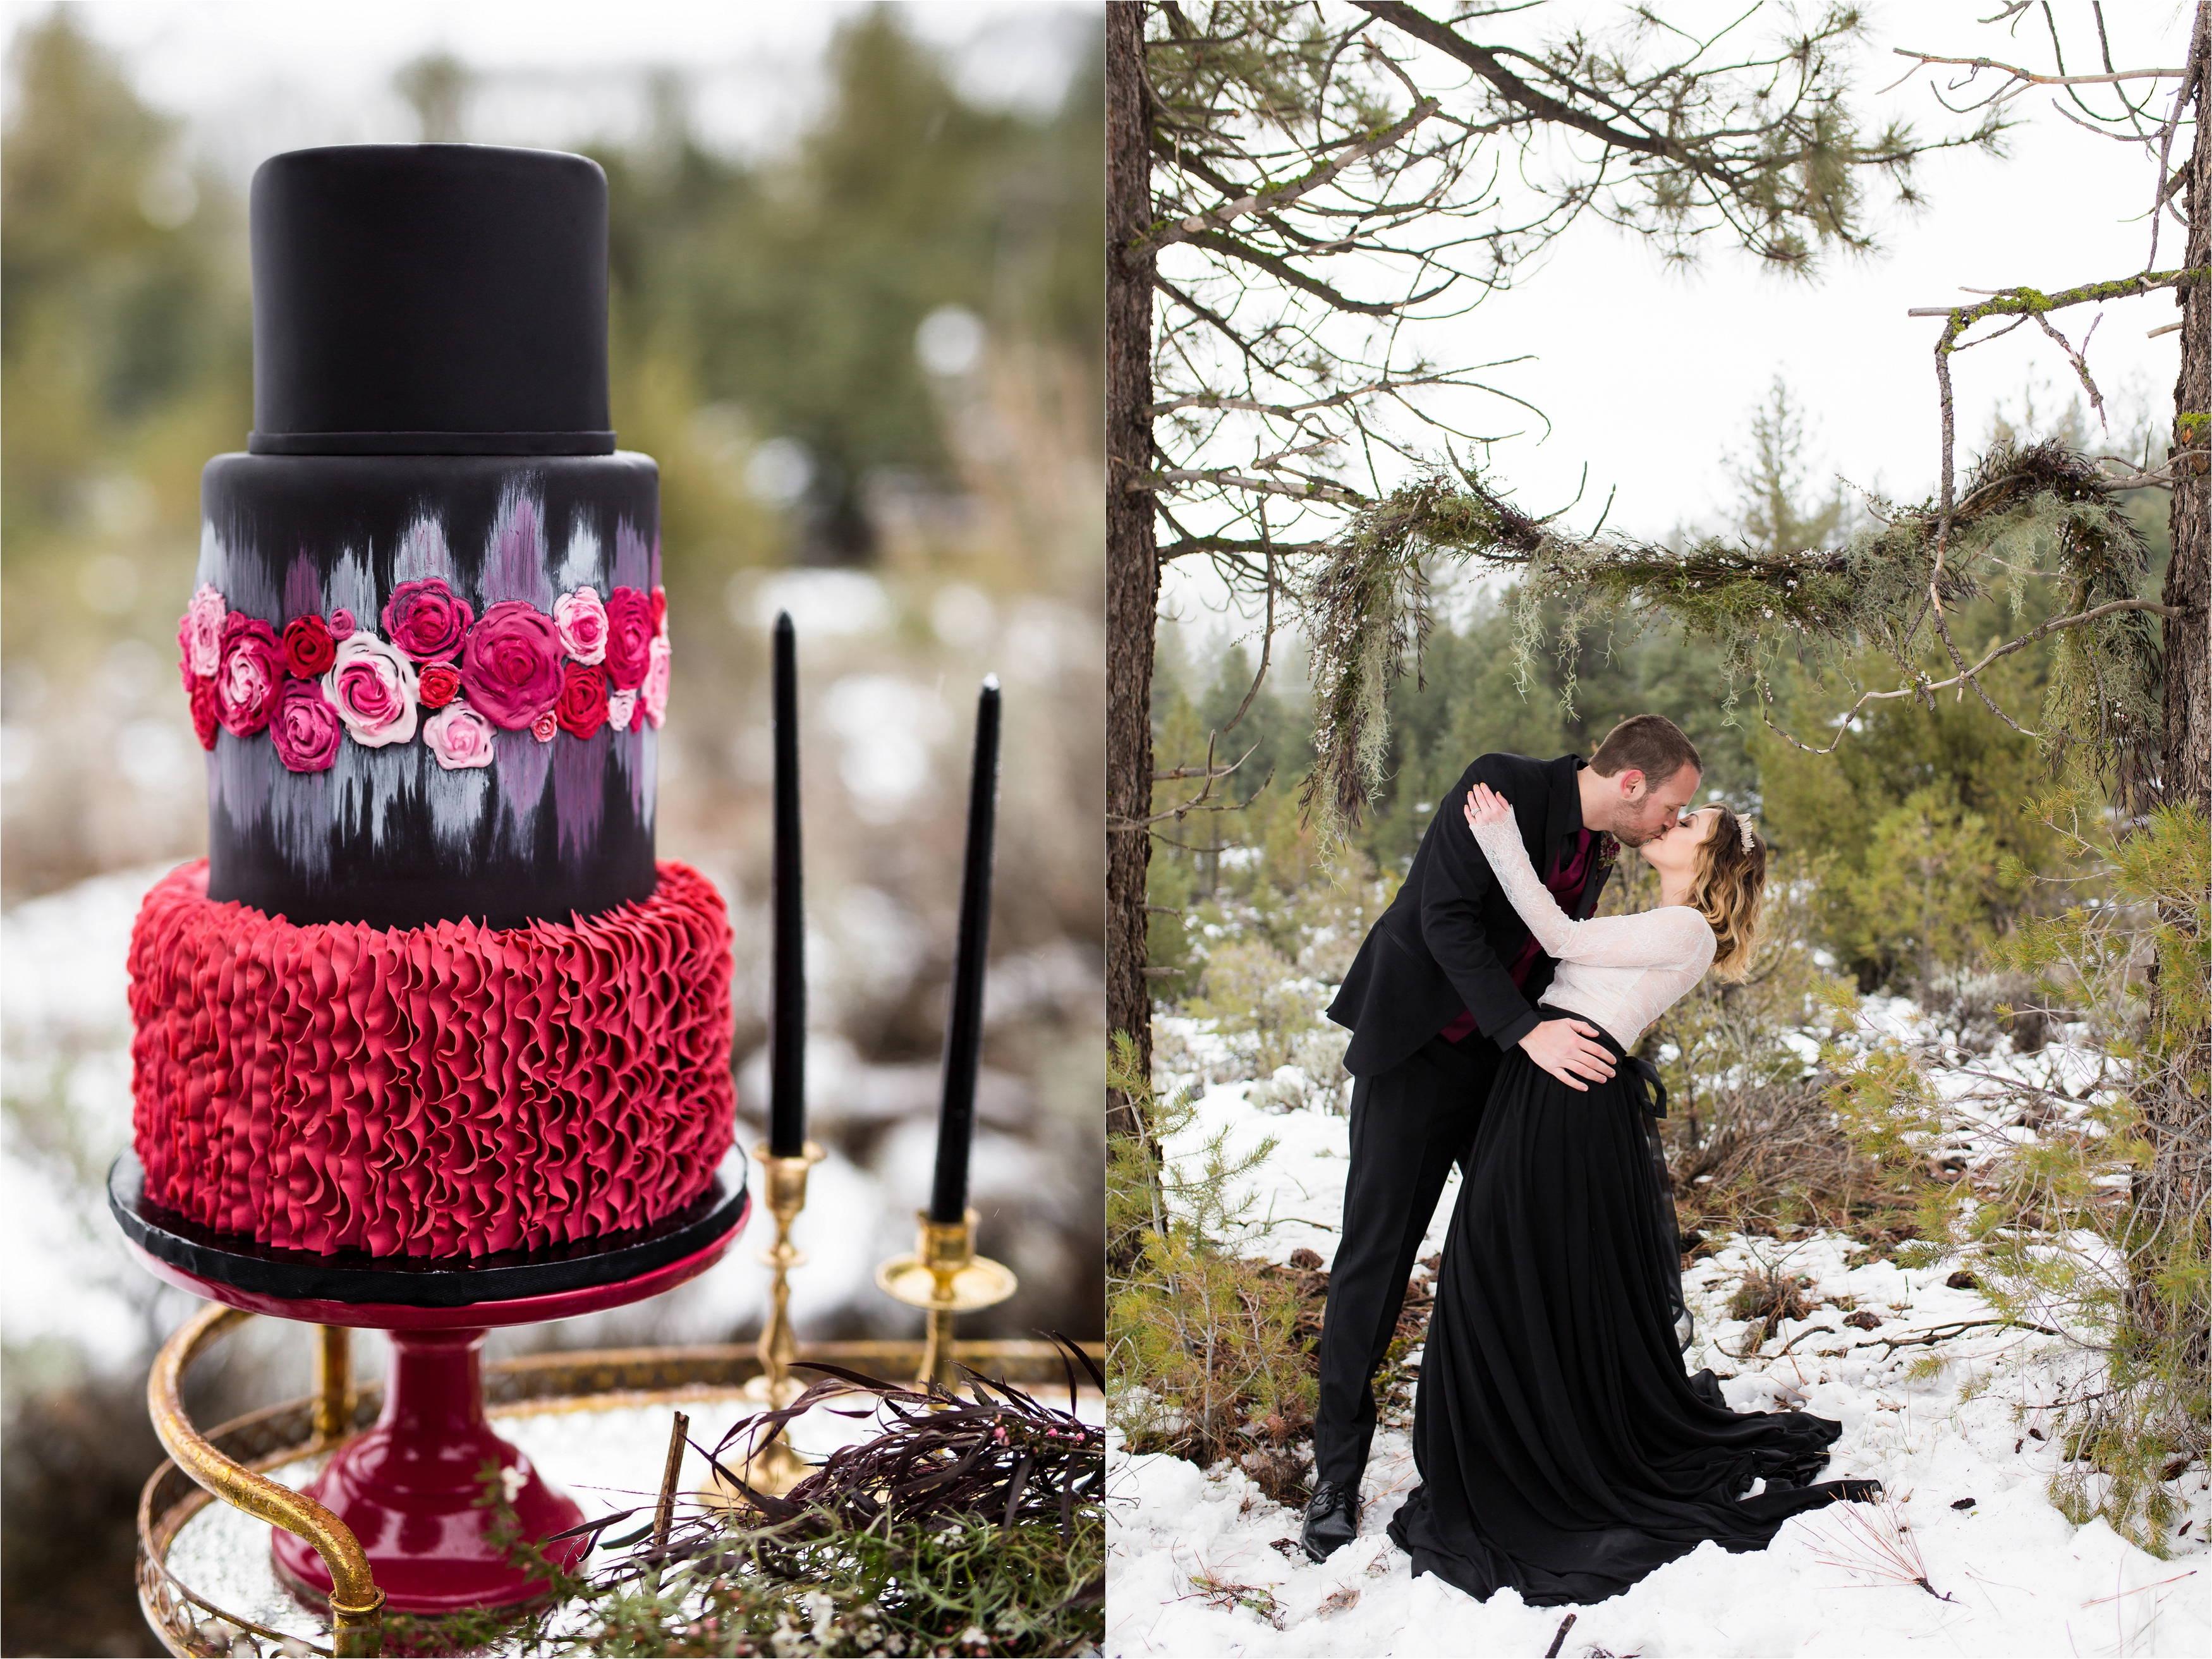 Epic black and red tiered wedding cake with flowers